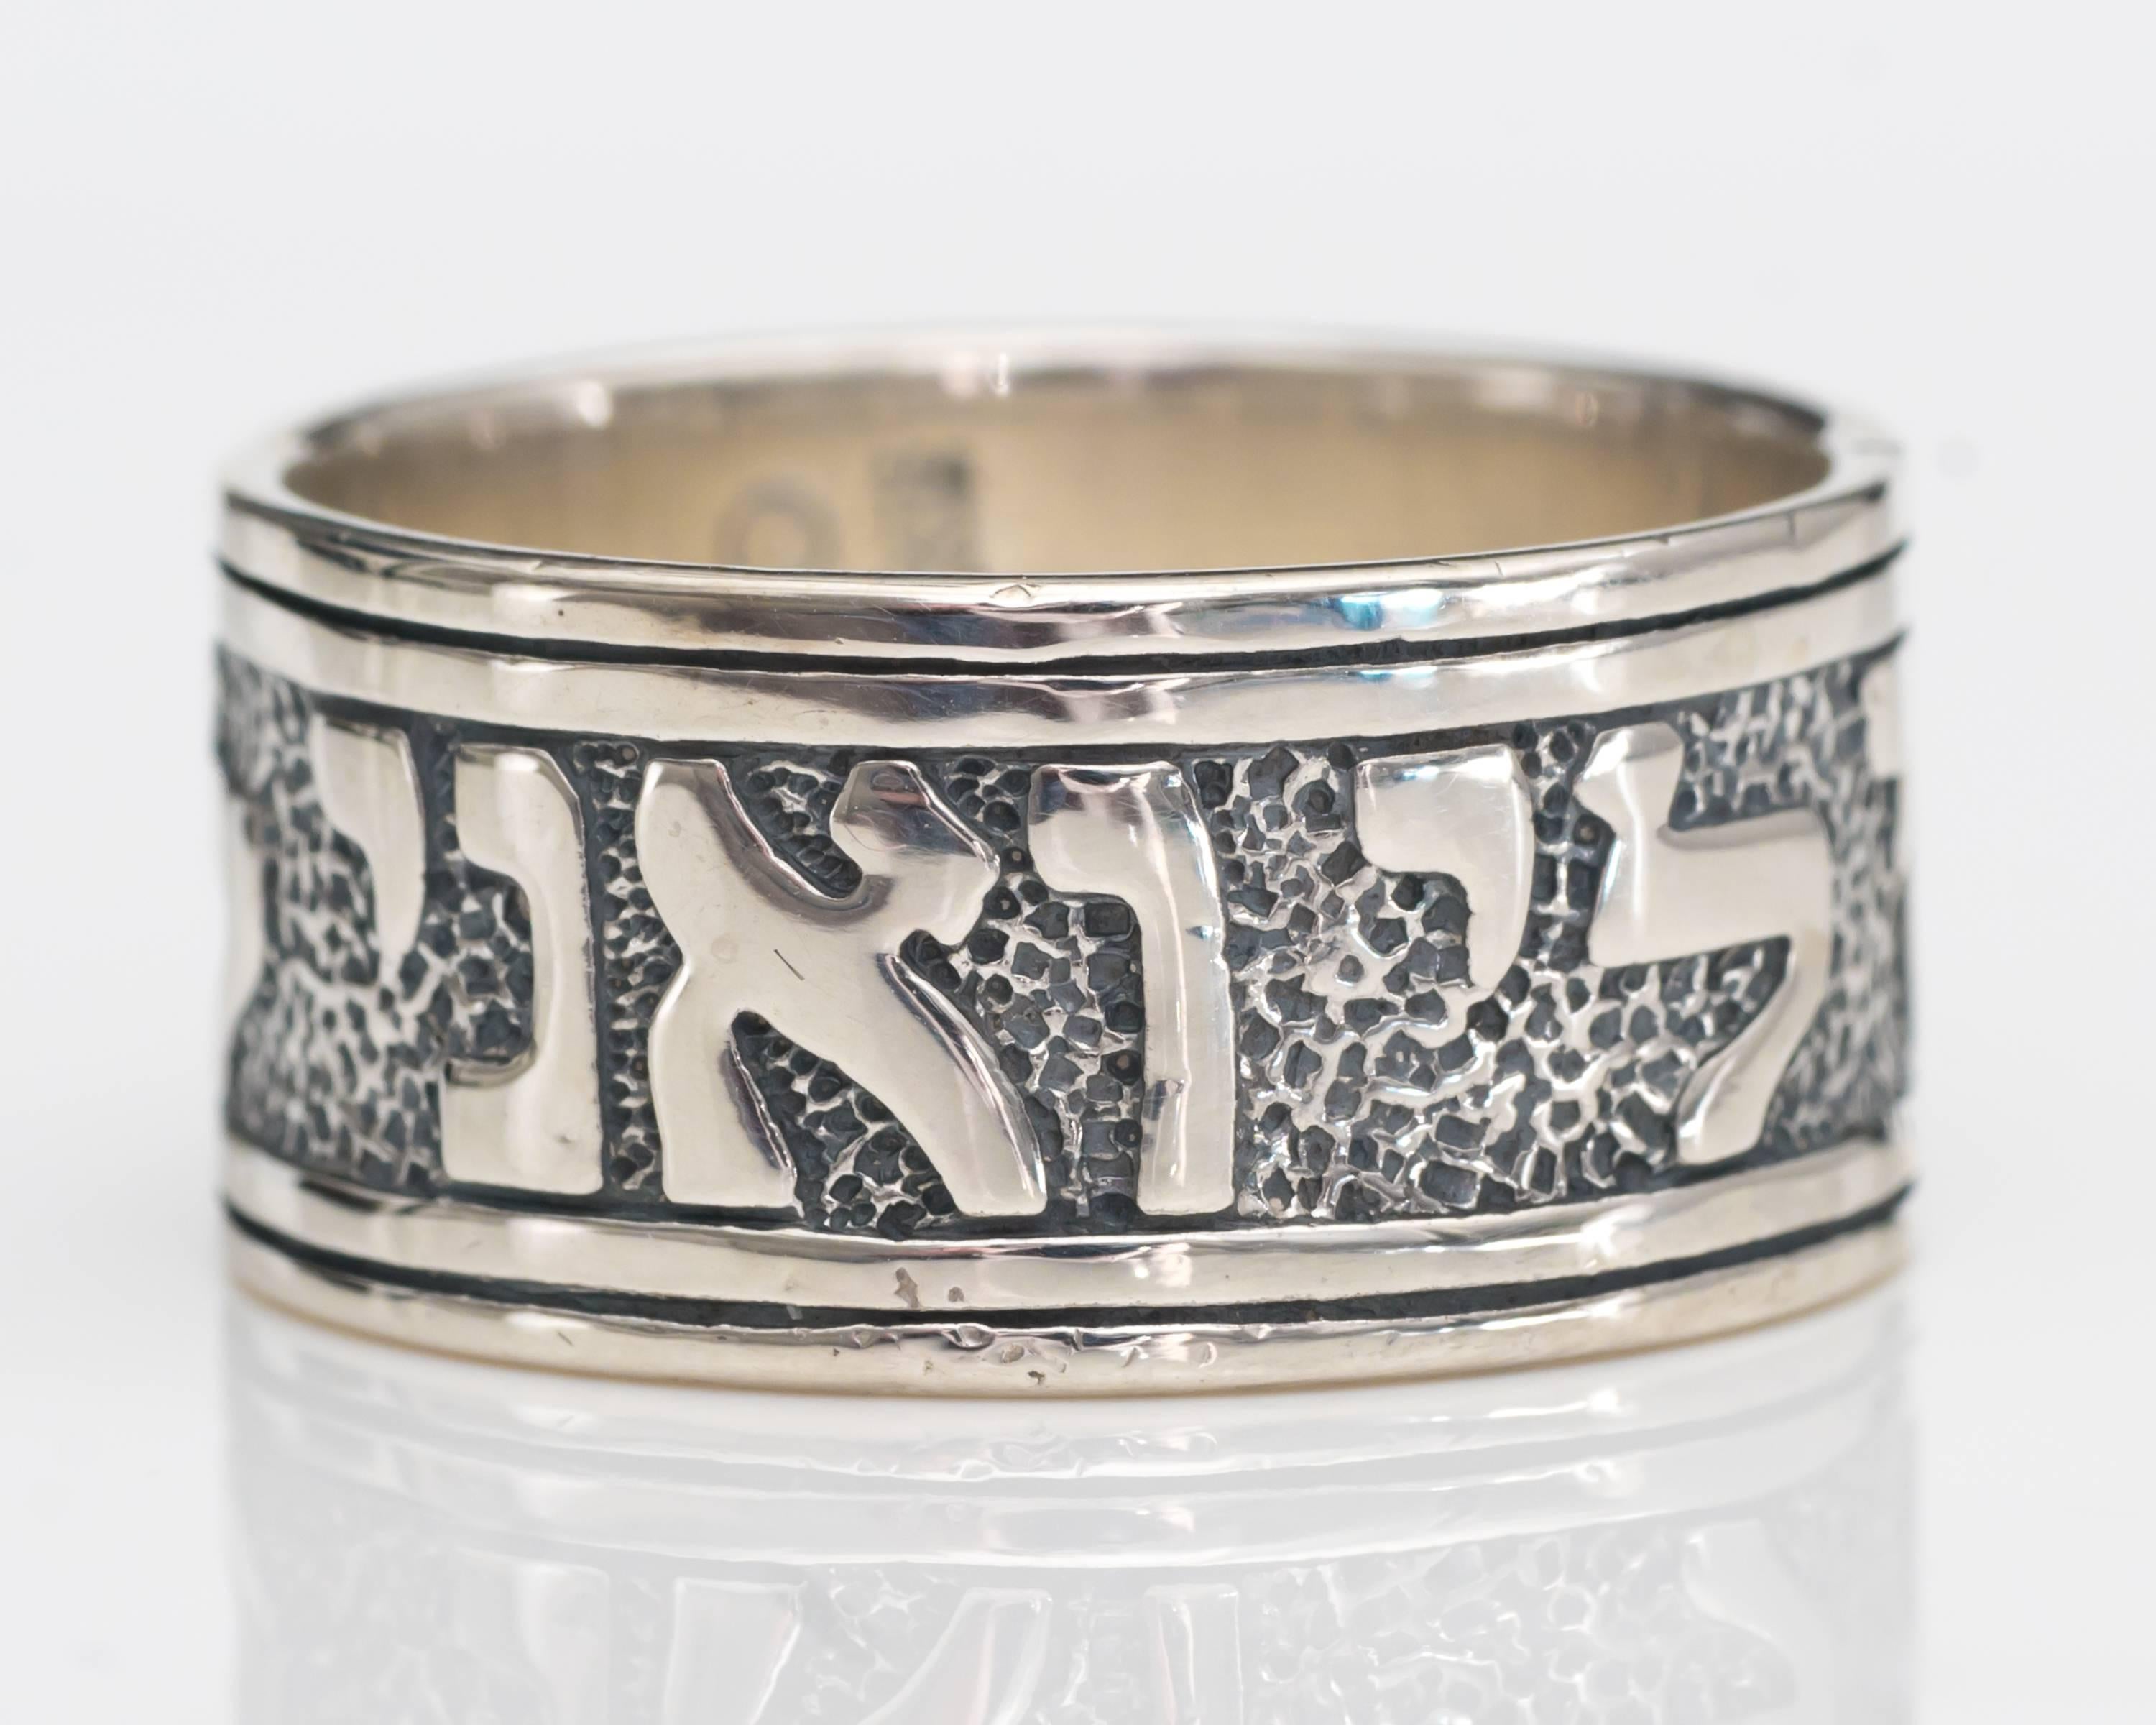 James Avery Song of Solomon - Sterling Silver

Iconic All-American jewelry designer James Avery keeps things simple.
This beautifully designed and crafted Song of Solomon wedding band exemplifies his distinctive style. 
This ring is crafted from